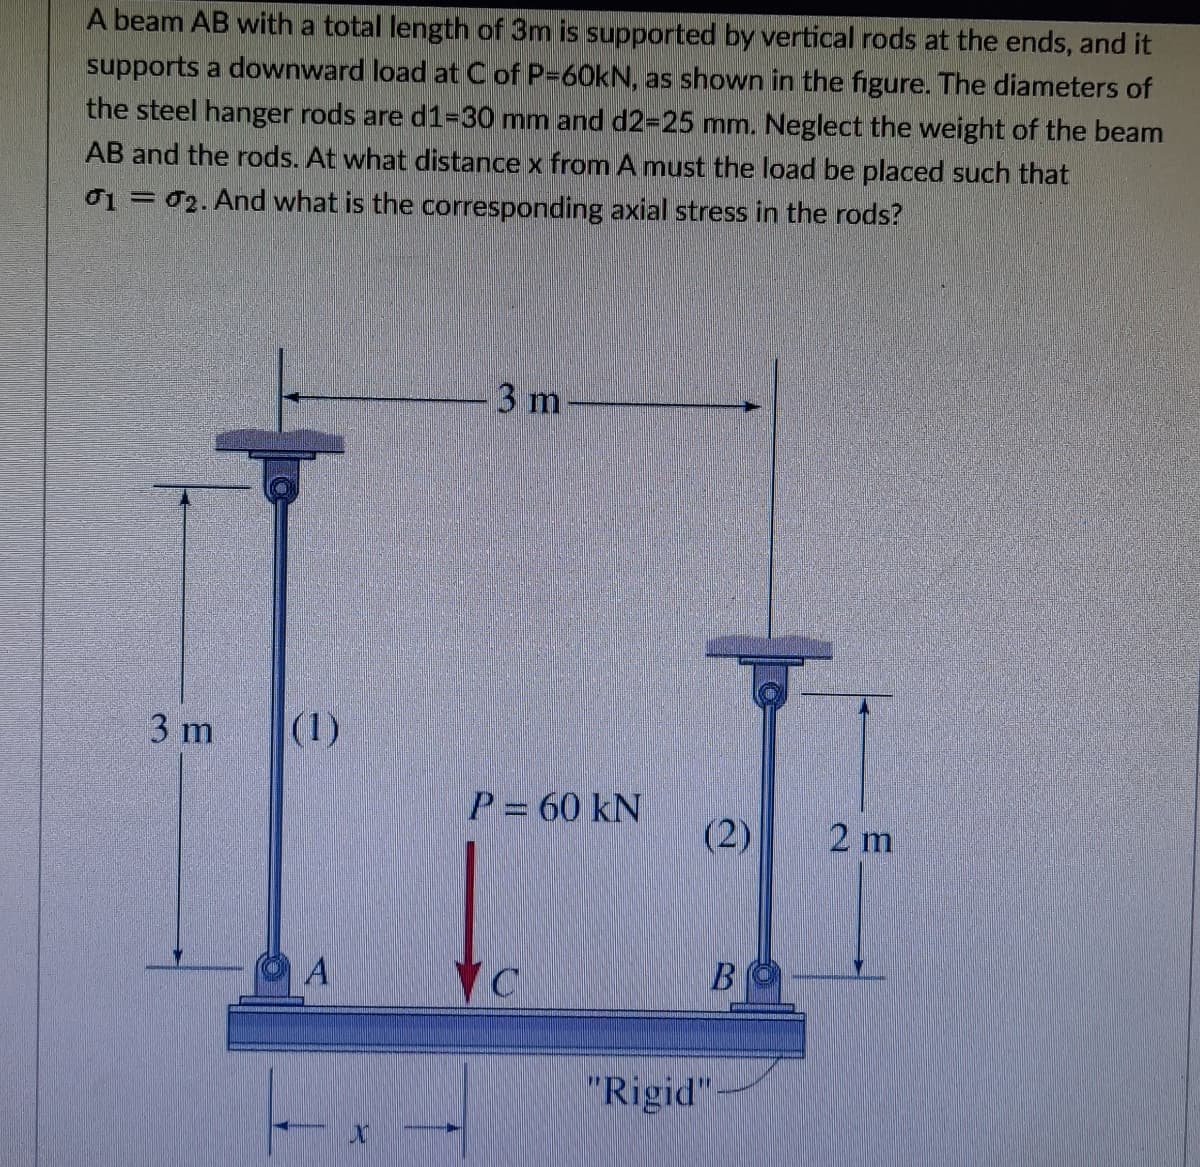 A beam AB with a total length of 3m is supported by vertical rods at the ends, and it
supports a downward load at C of P=60kN, as shown in the figure. The diameters of
the steel hanger rods are d1=30 mm and d23D25 mm. Neglect the weight of the beam
AB and the rods. At what distance x from A must the load be placed such that
01 = 02. And what is the corresponding axial stress in the rods?
3 m
3 m
(1)
P= 60 kN
(2)
2 m
B
"Rigid":
